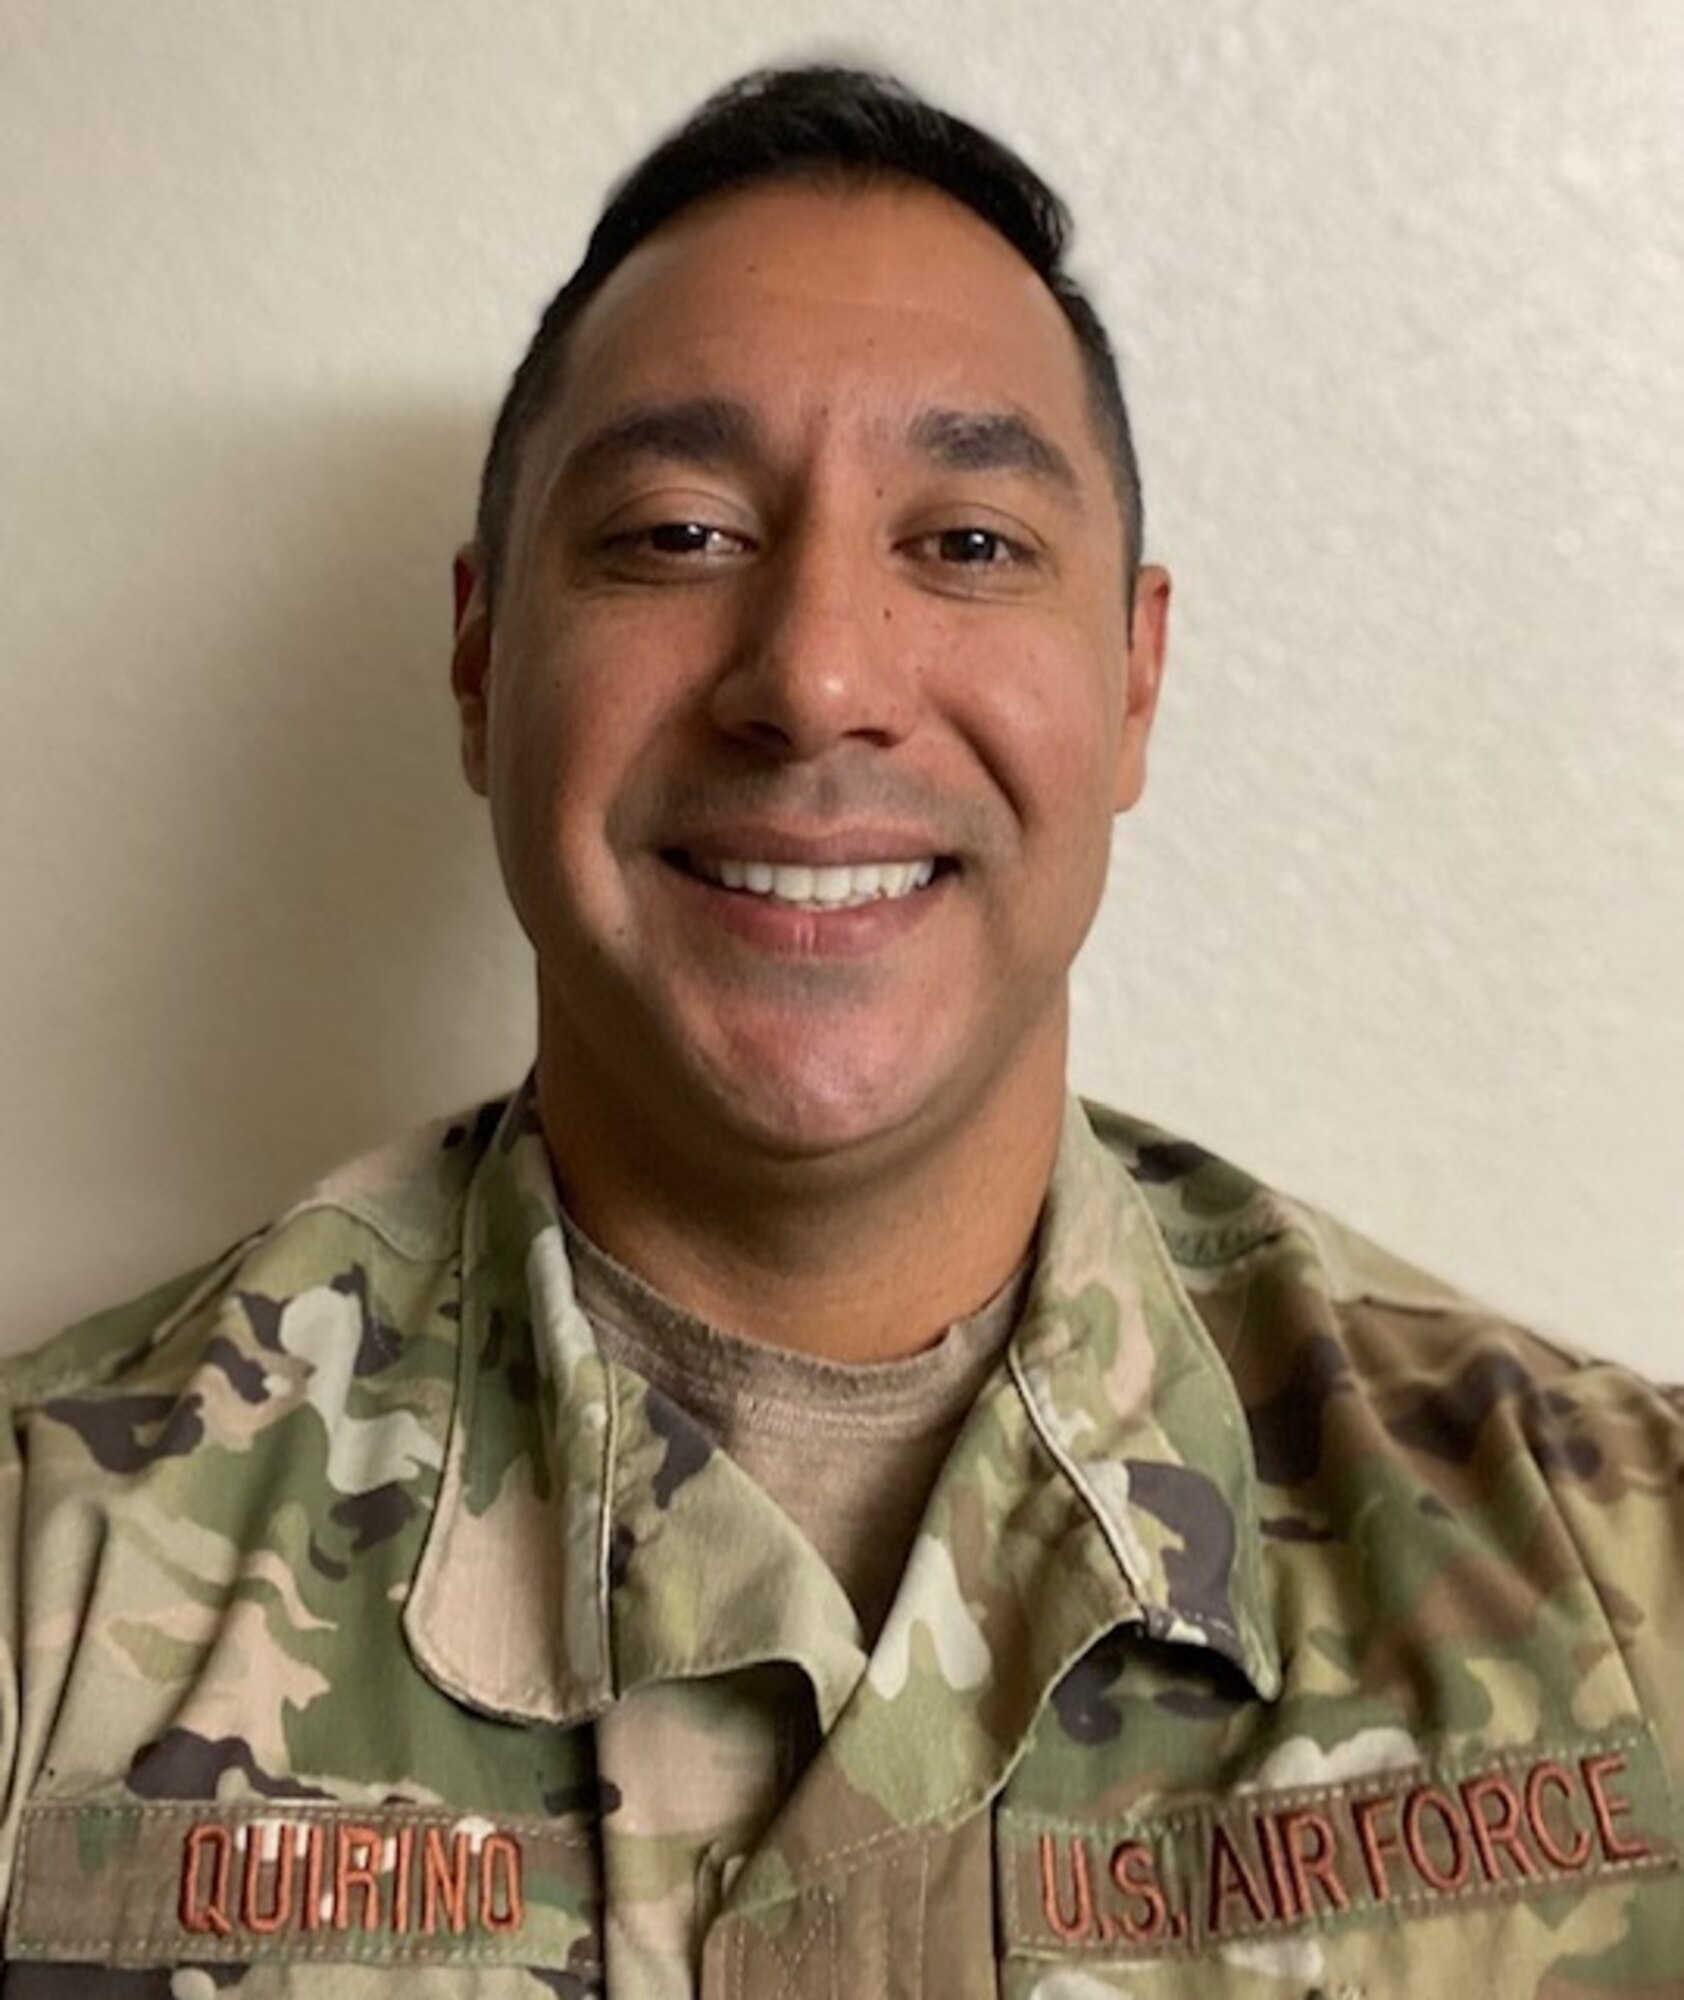 Master Sgt. Manuel Quirino, 352nd Cyberspace Operations Squadron intelligence analyst, recently acted quickly to provide life-saving CPR to an 89-year-old man while running an errand at a local pet store. Quirino credits his CPR training and on-the-job experience as an intelligence analyst for his ability to think critically in a stressful situation. (Courtesy photo)